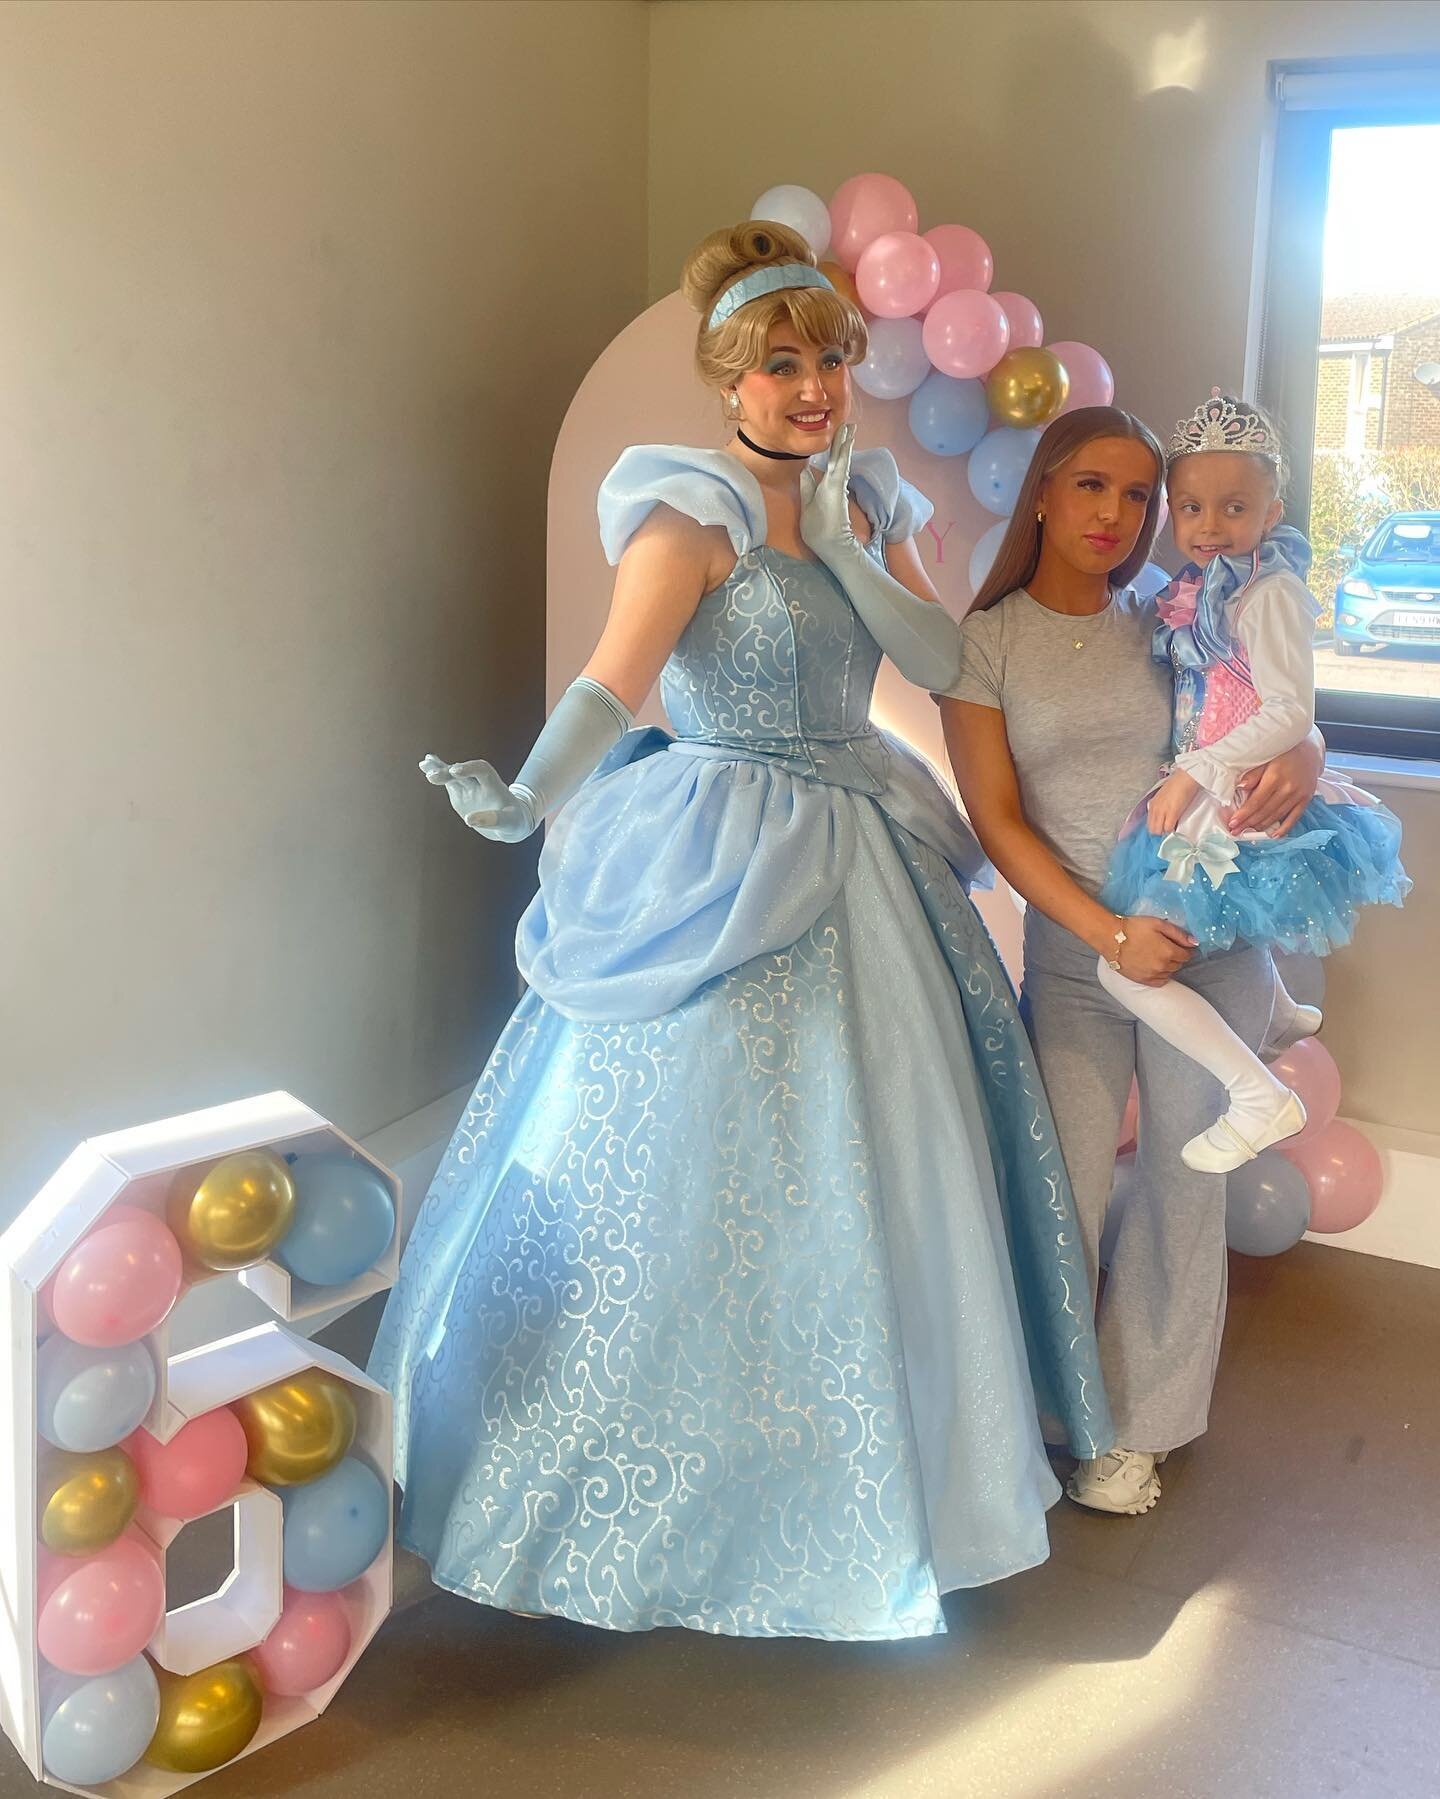 We love the colour aesthetic of the Cinderella movie, and we believe this party d&eacute;cor and birthday girl captured it perfectly!💗💛💙 invite Cinderella or any of her princess friends to your next party✨

#WhereTheMagicBegins
💻www.magicalprince